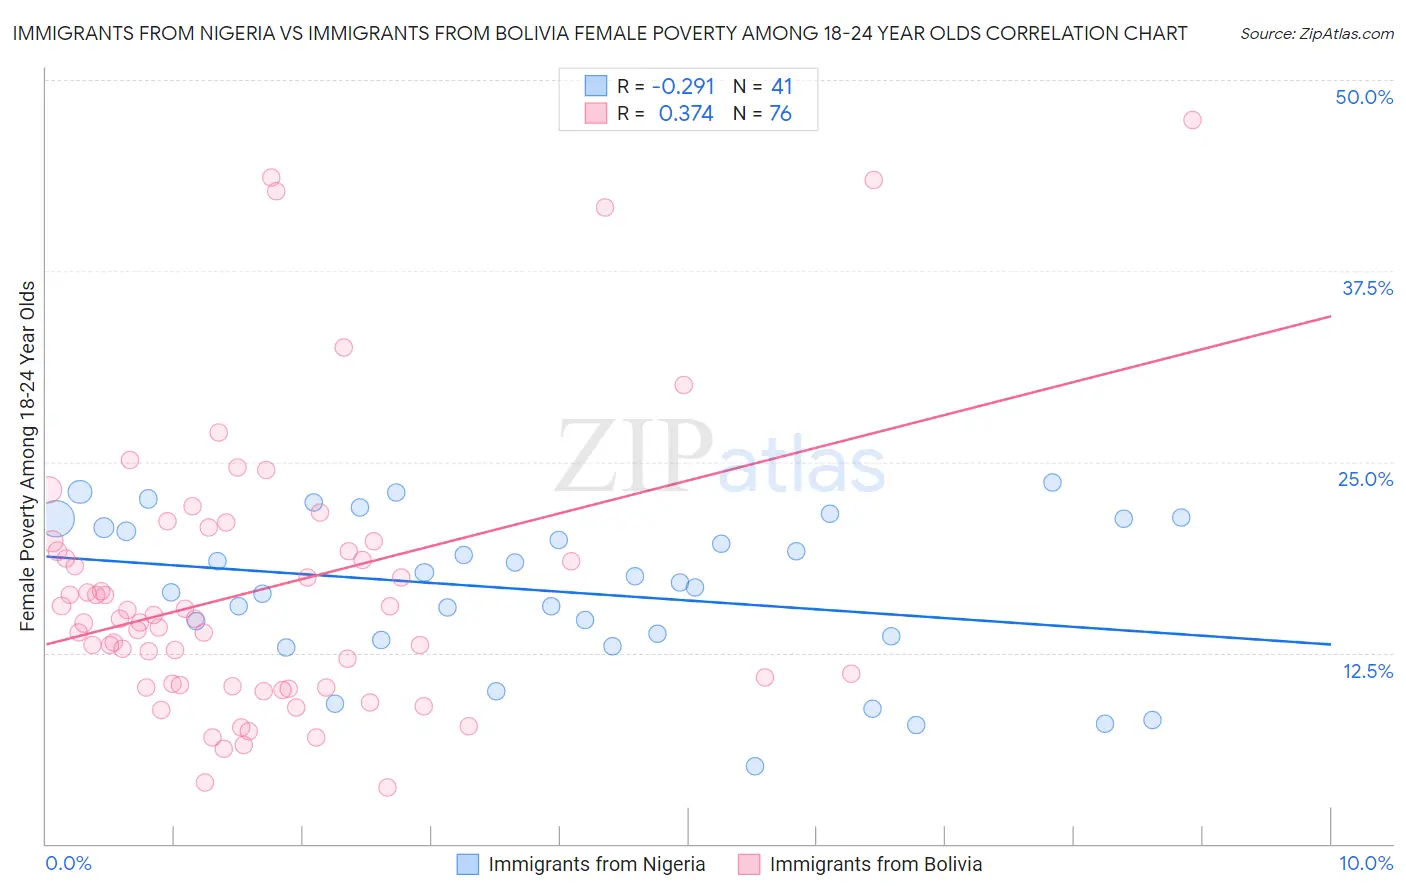 Immigrants from Nigeria vs Immigrants from Bolivia Female Poverty Among 18-24 Year Olds